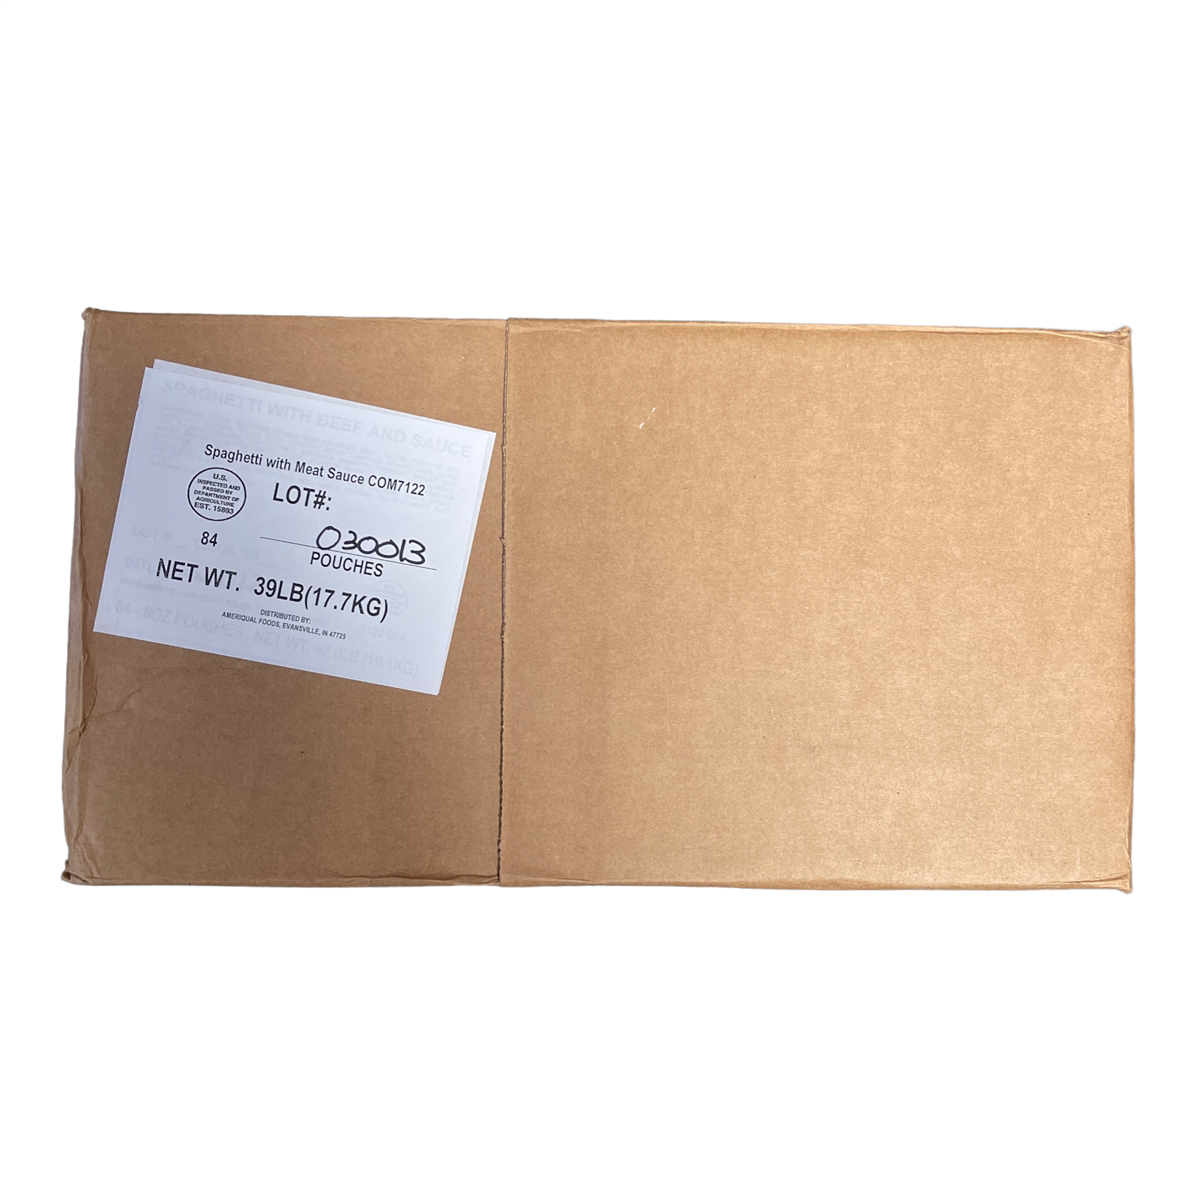 BULK MRE Entree - 72 packs of Spaghetti with Meat and Sauce